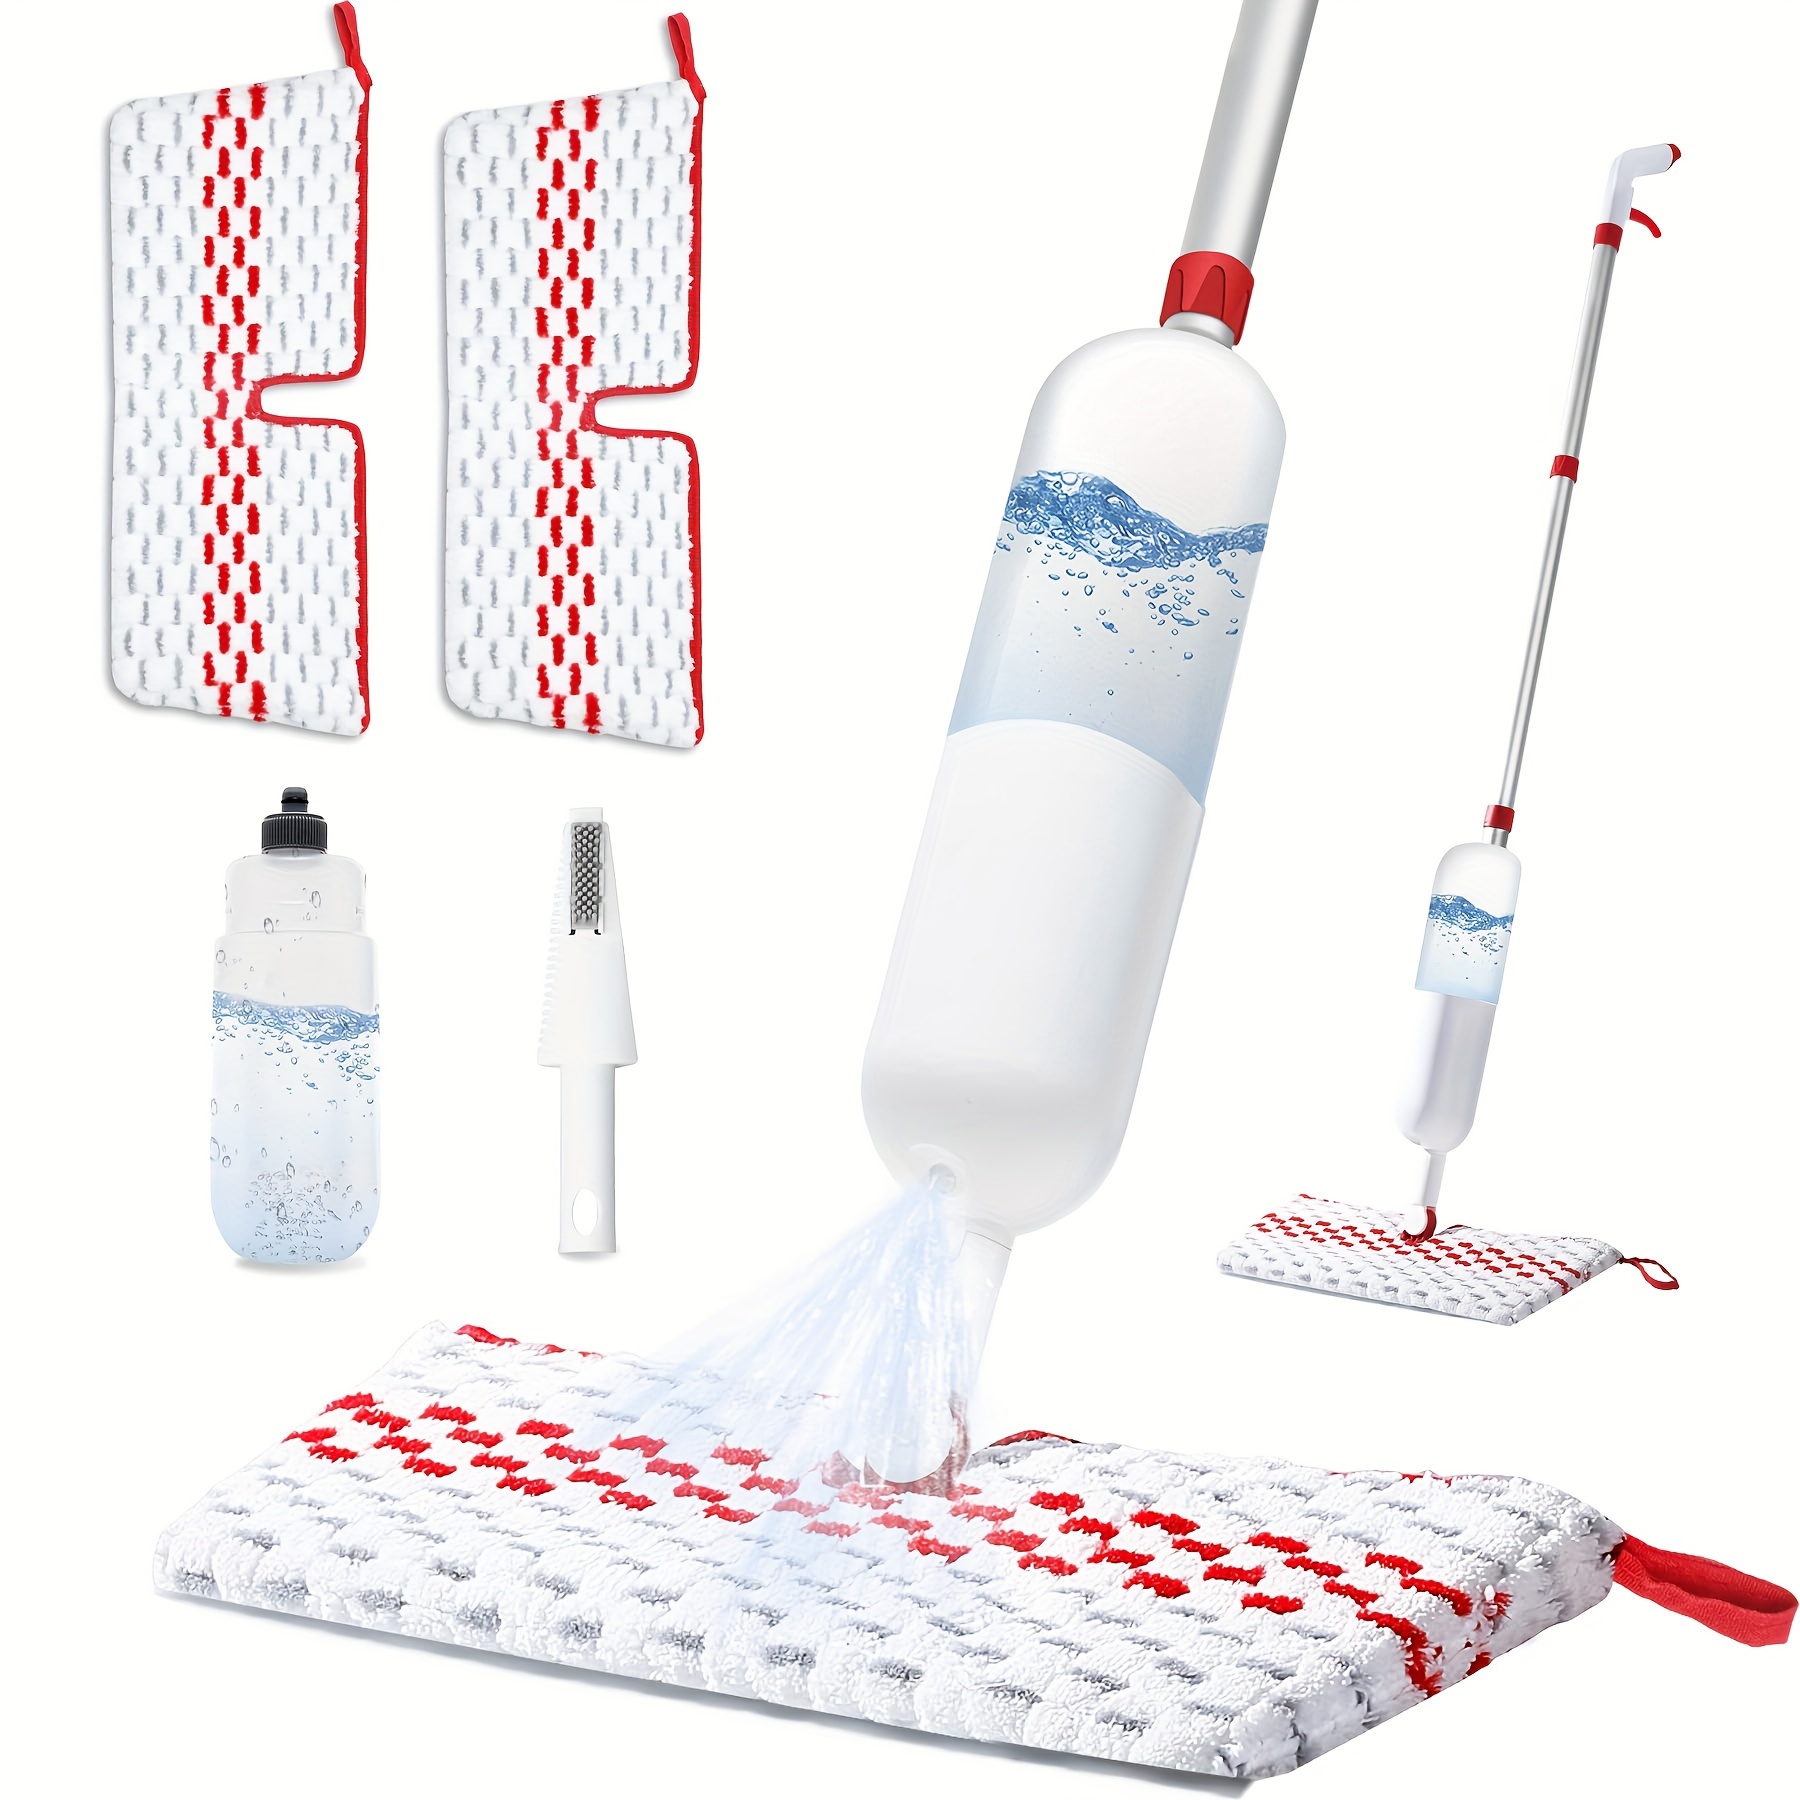 

Spray Mop For Floor Cleaning, Dust Wet Mops For Floor Cleaning With 2 Washable Double-sided Microfiber Pads, 650ml Refillable Bottle, Dry Wet Floor Mop For Hardwood Laminate And More Floors